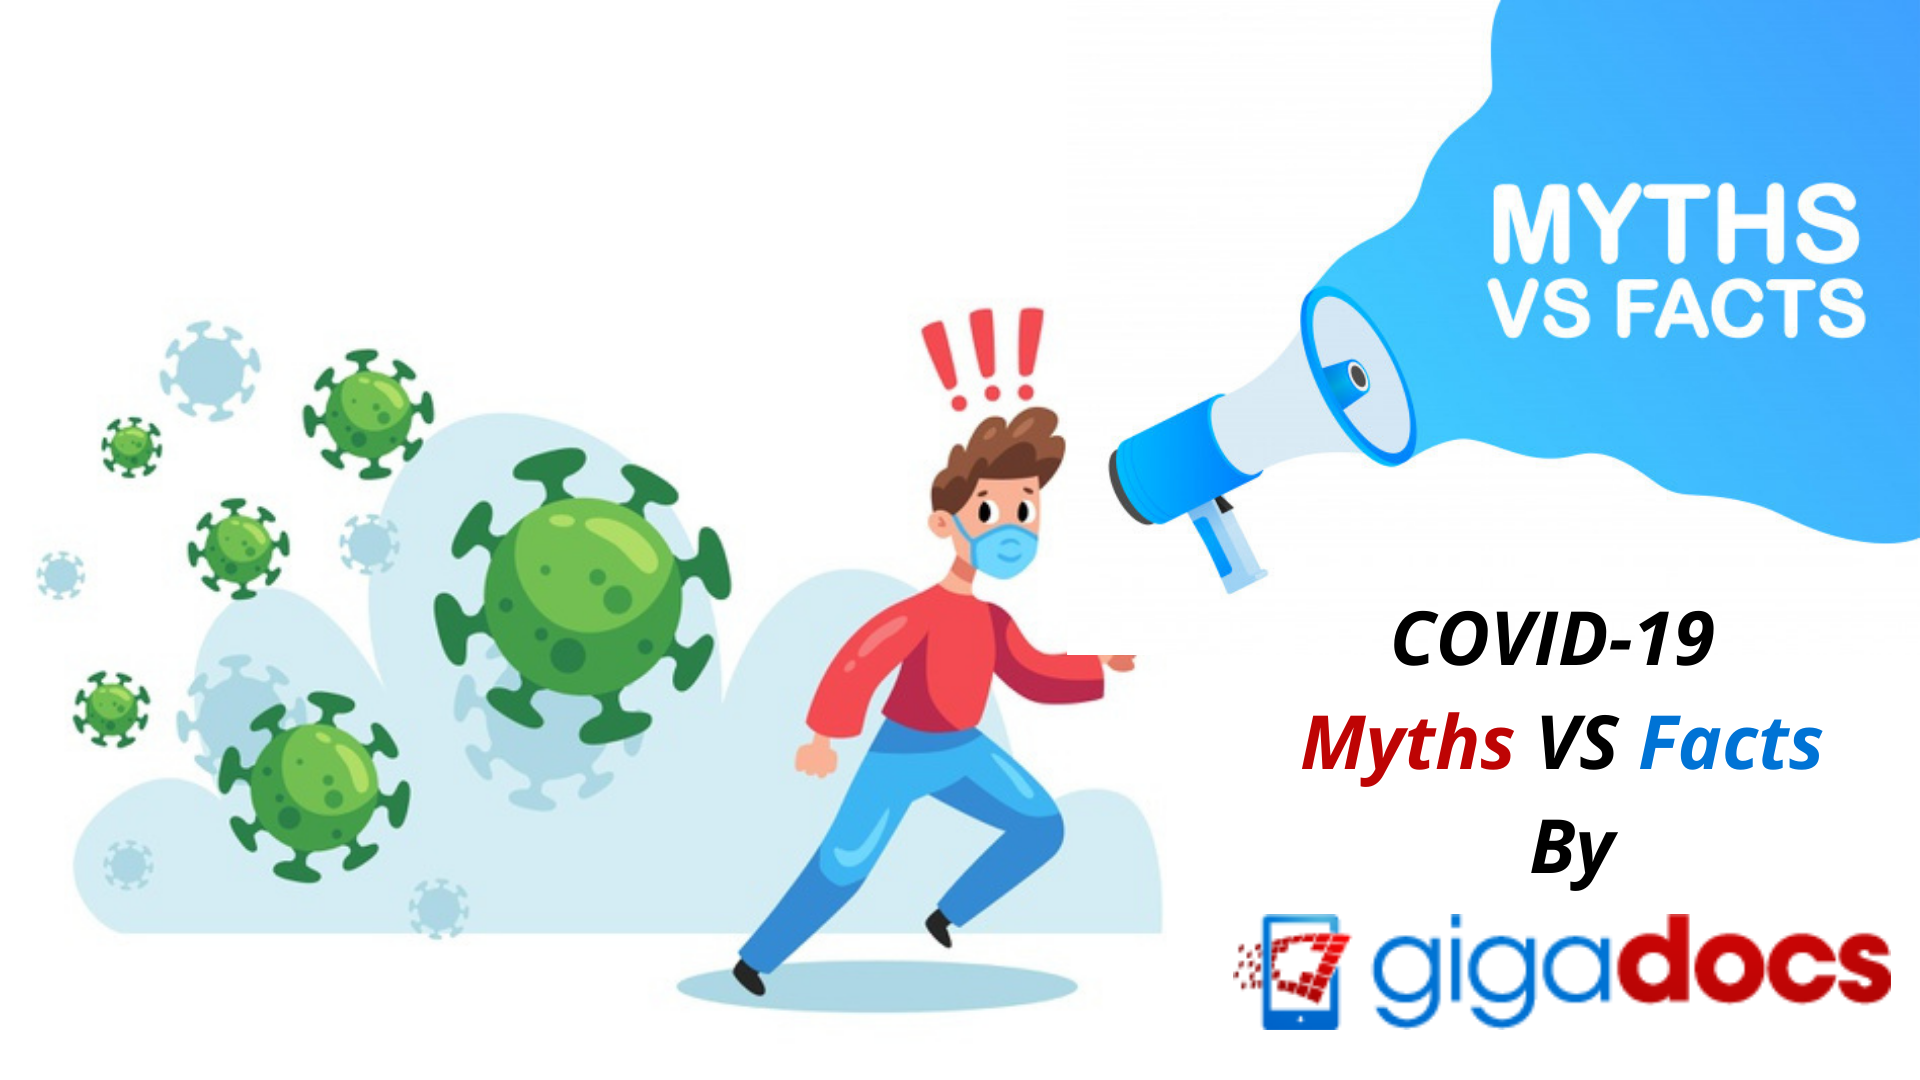 COVID-19 Myths and Facts By Gigadocs | Common Myths and Facts Related to the Coronavirus.